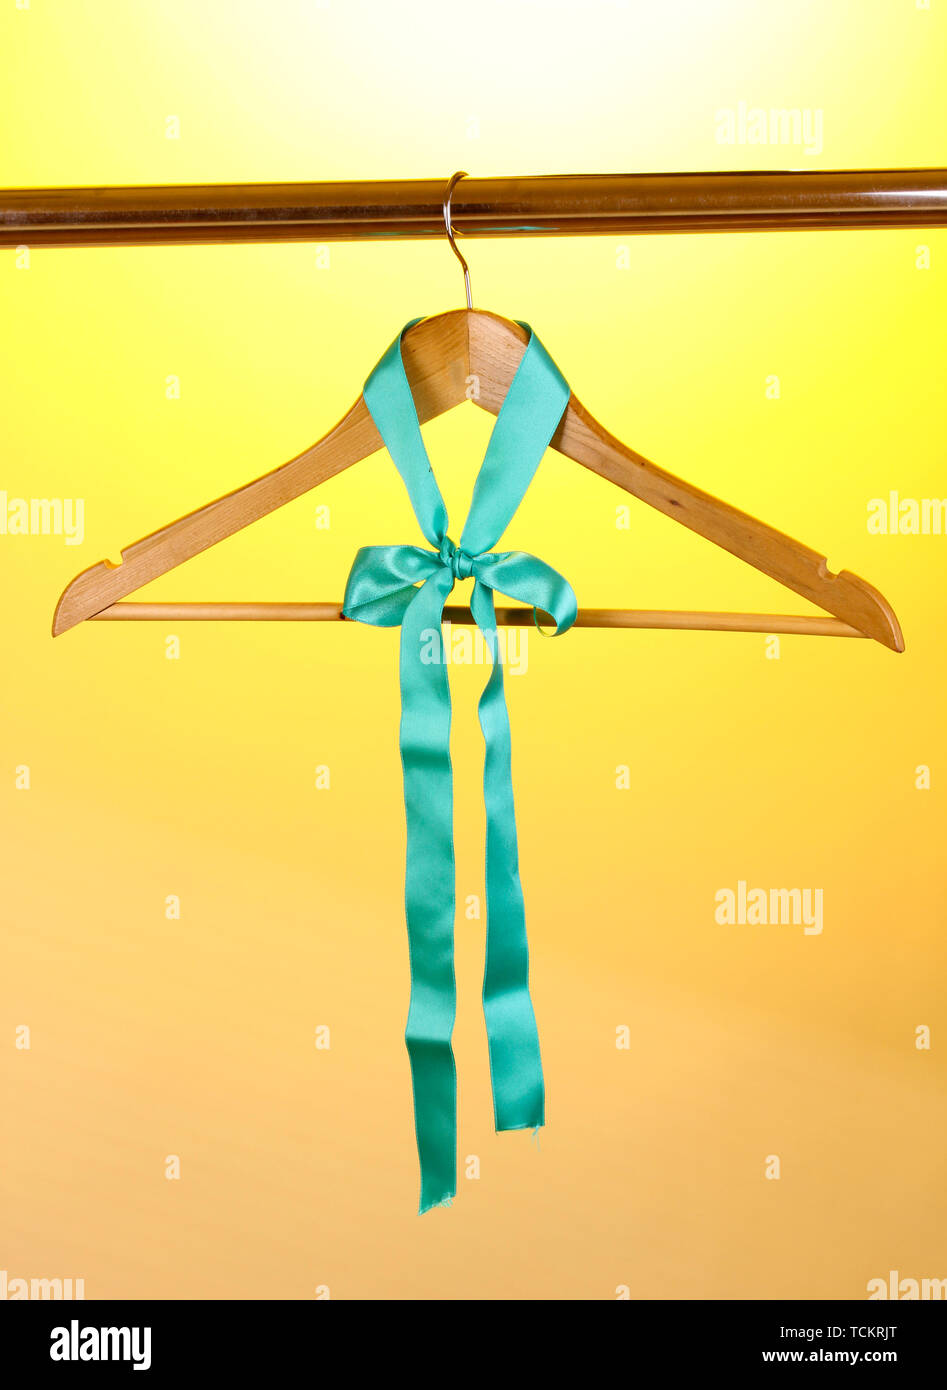 Beautiful turquoise bow hanging on wooden hanger on yellow background Stock Photo